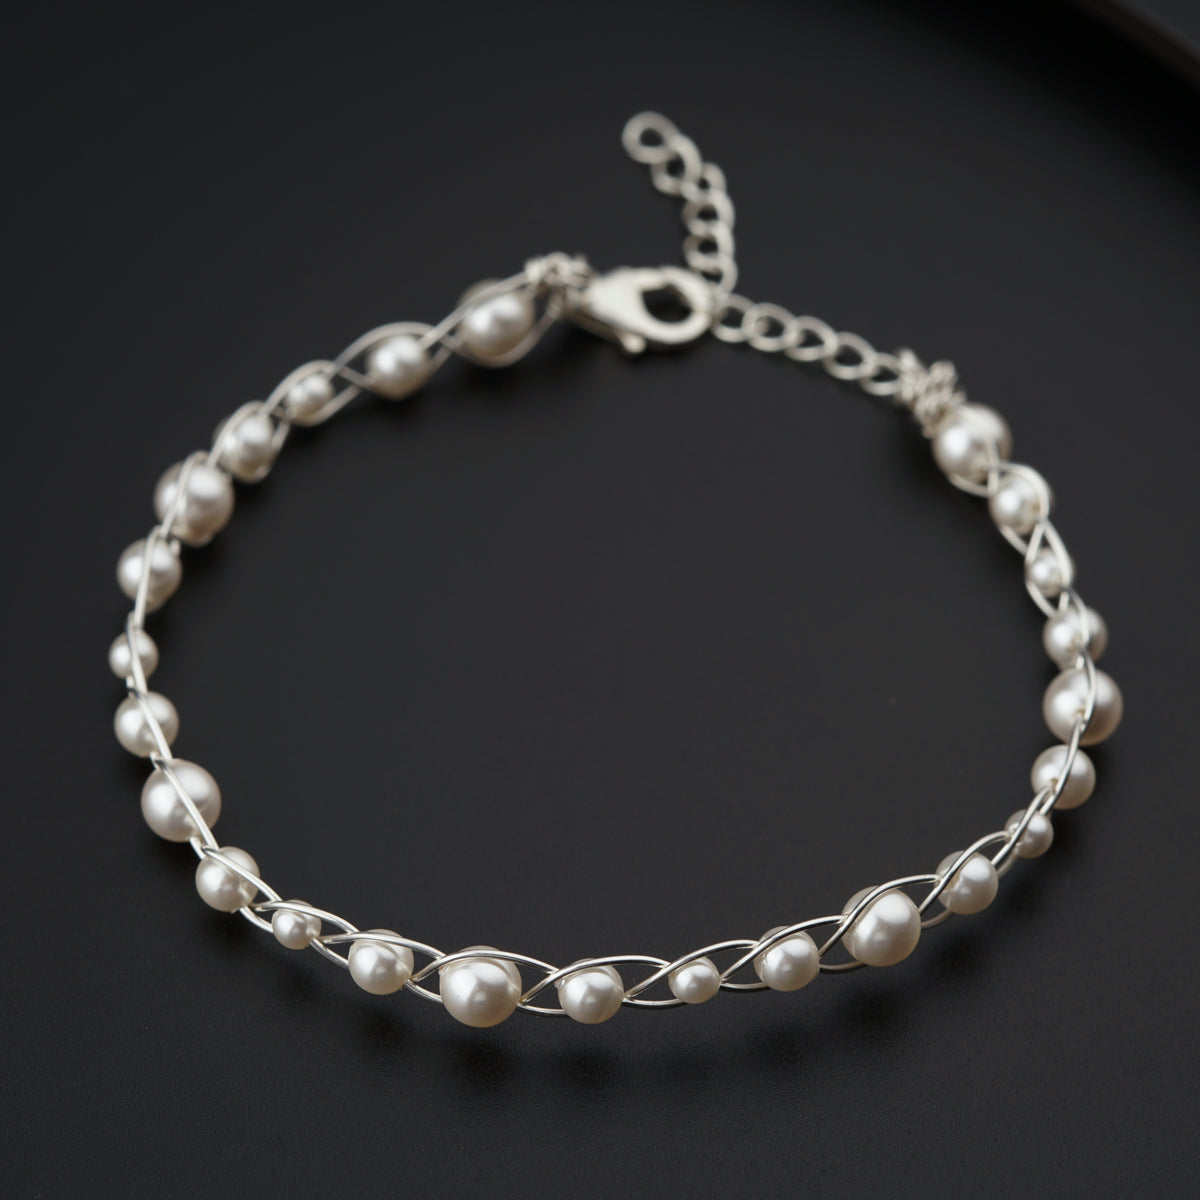 a silver bracelet with pearls on a black surface